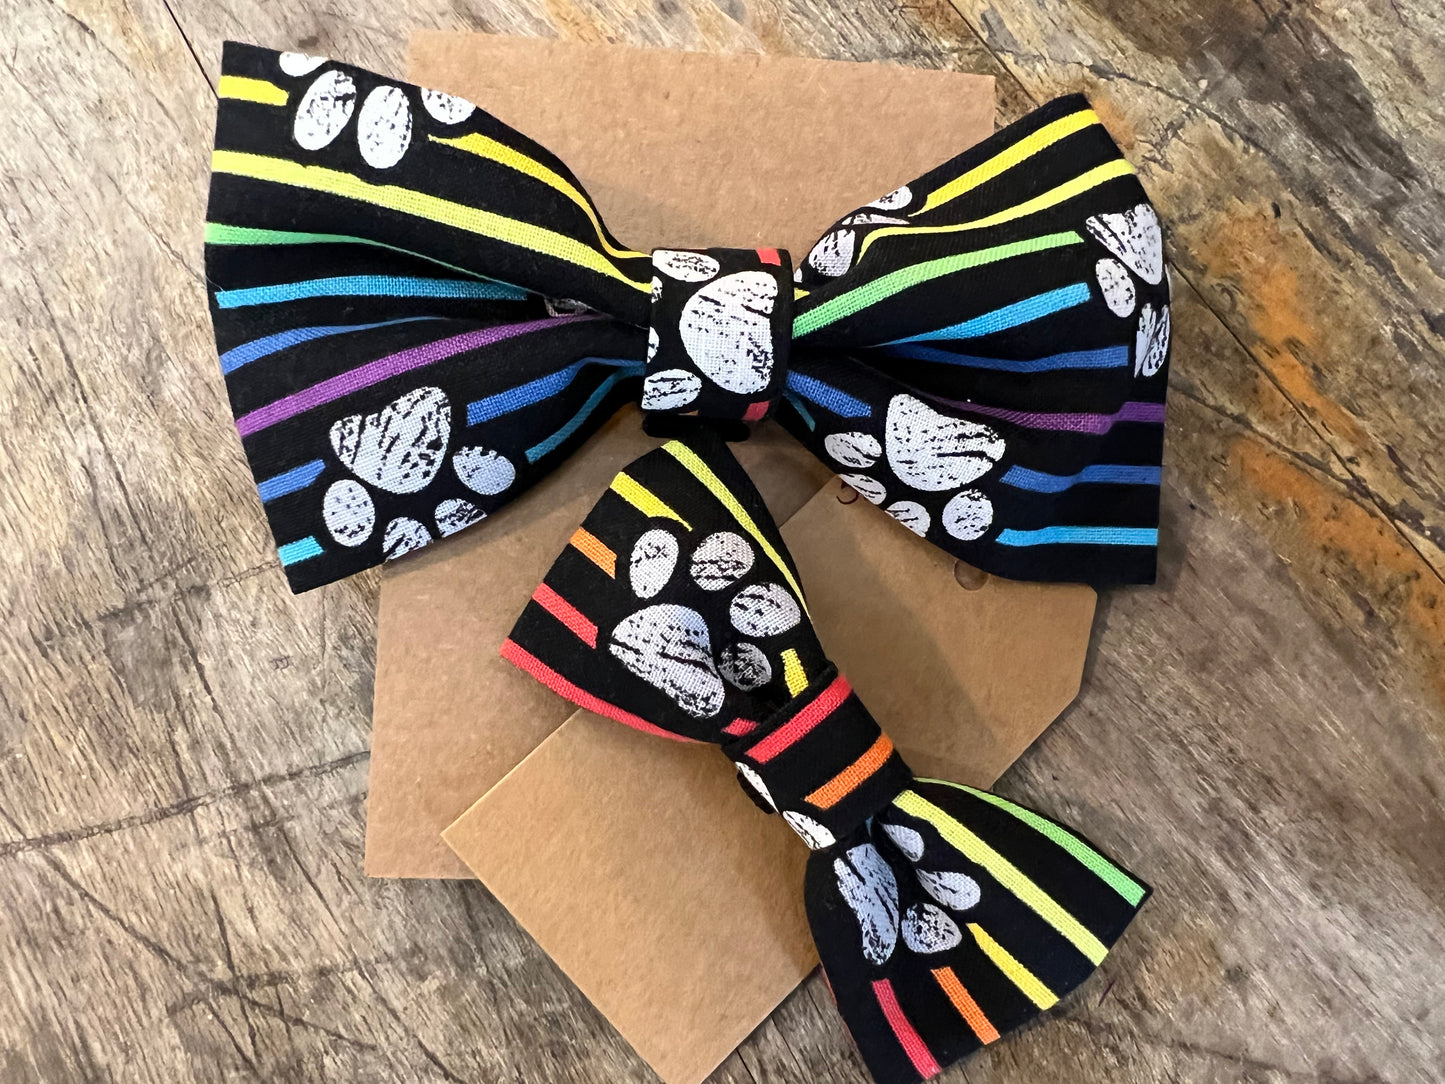 Alfred's Bows "Paws & Stripes" Medium Bow